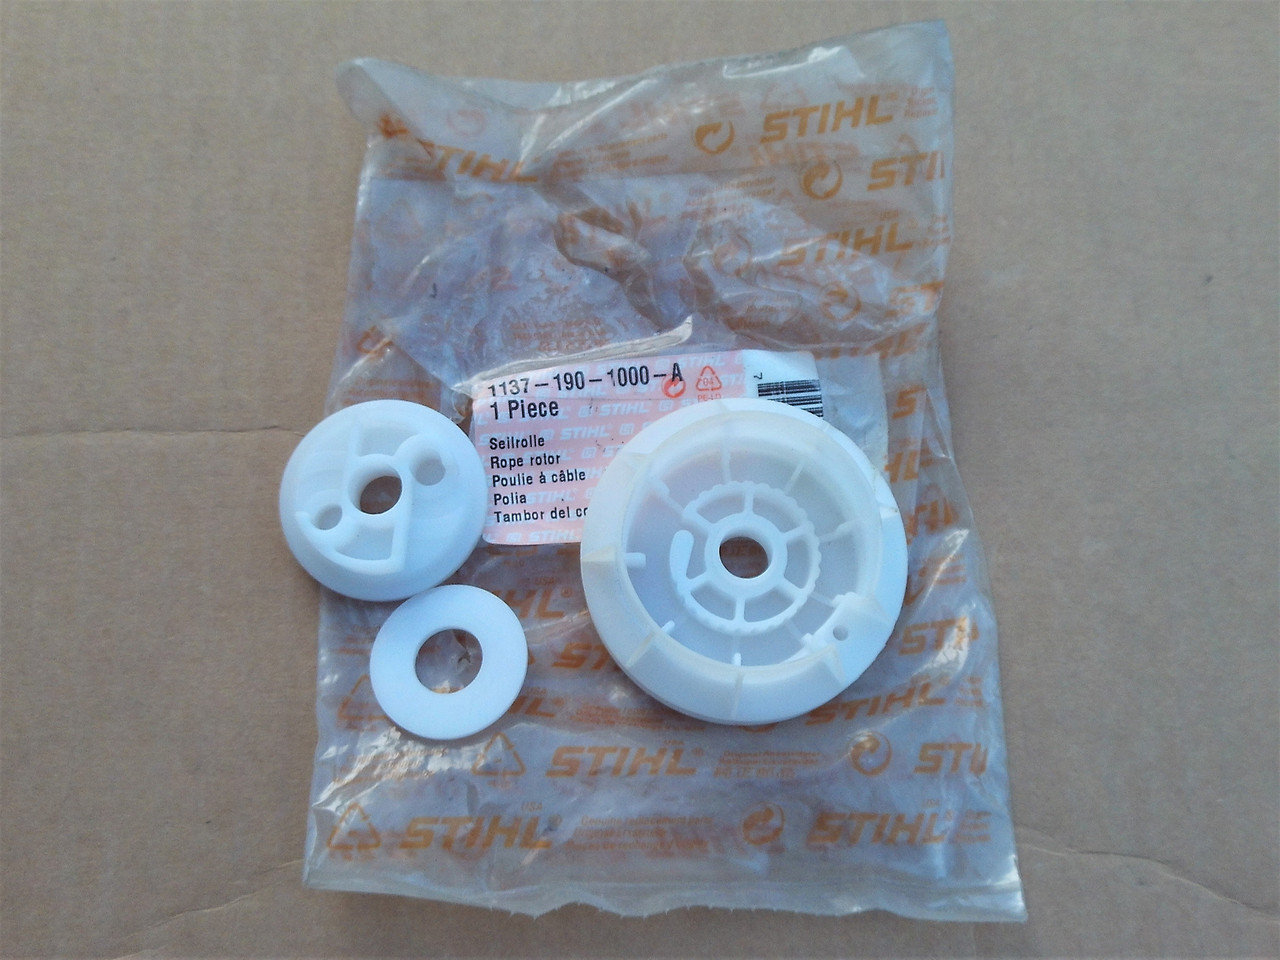 Stihl Starter Pulley Kit 1137-190-1000, 11371901000 (Does Not Include Spring)